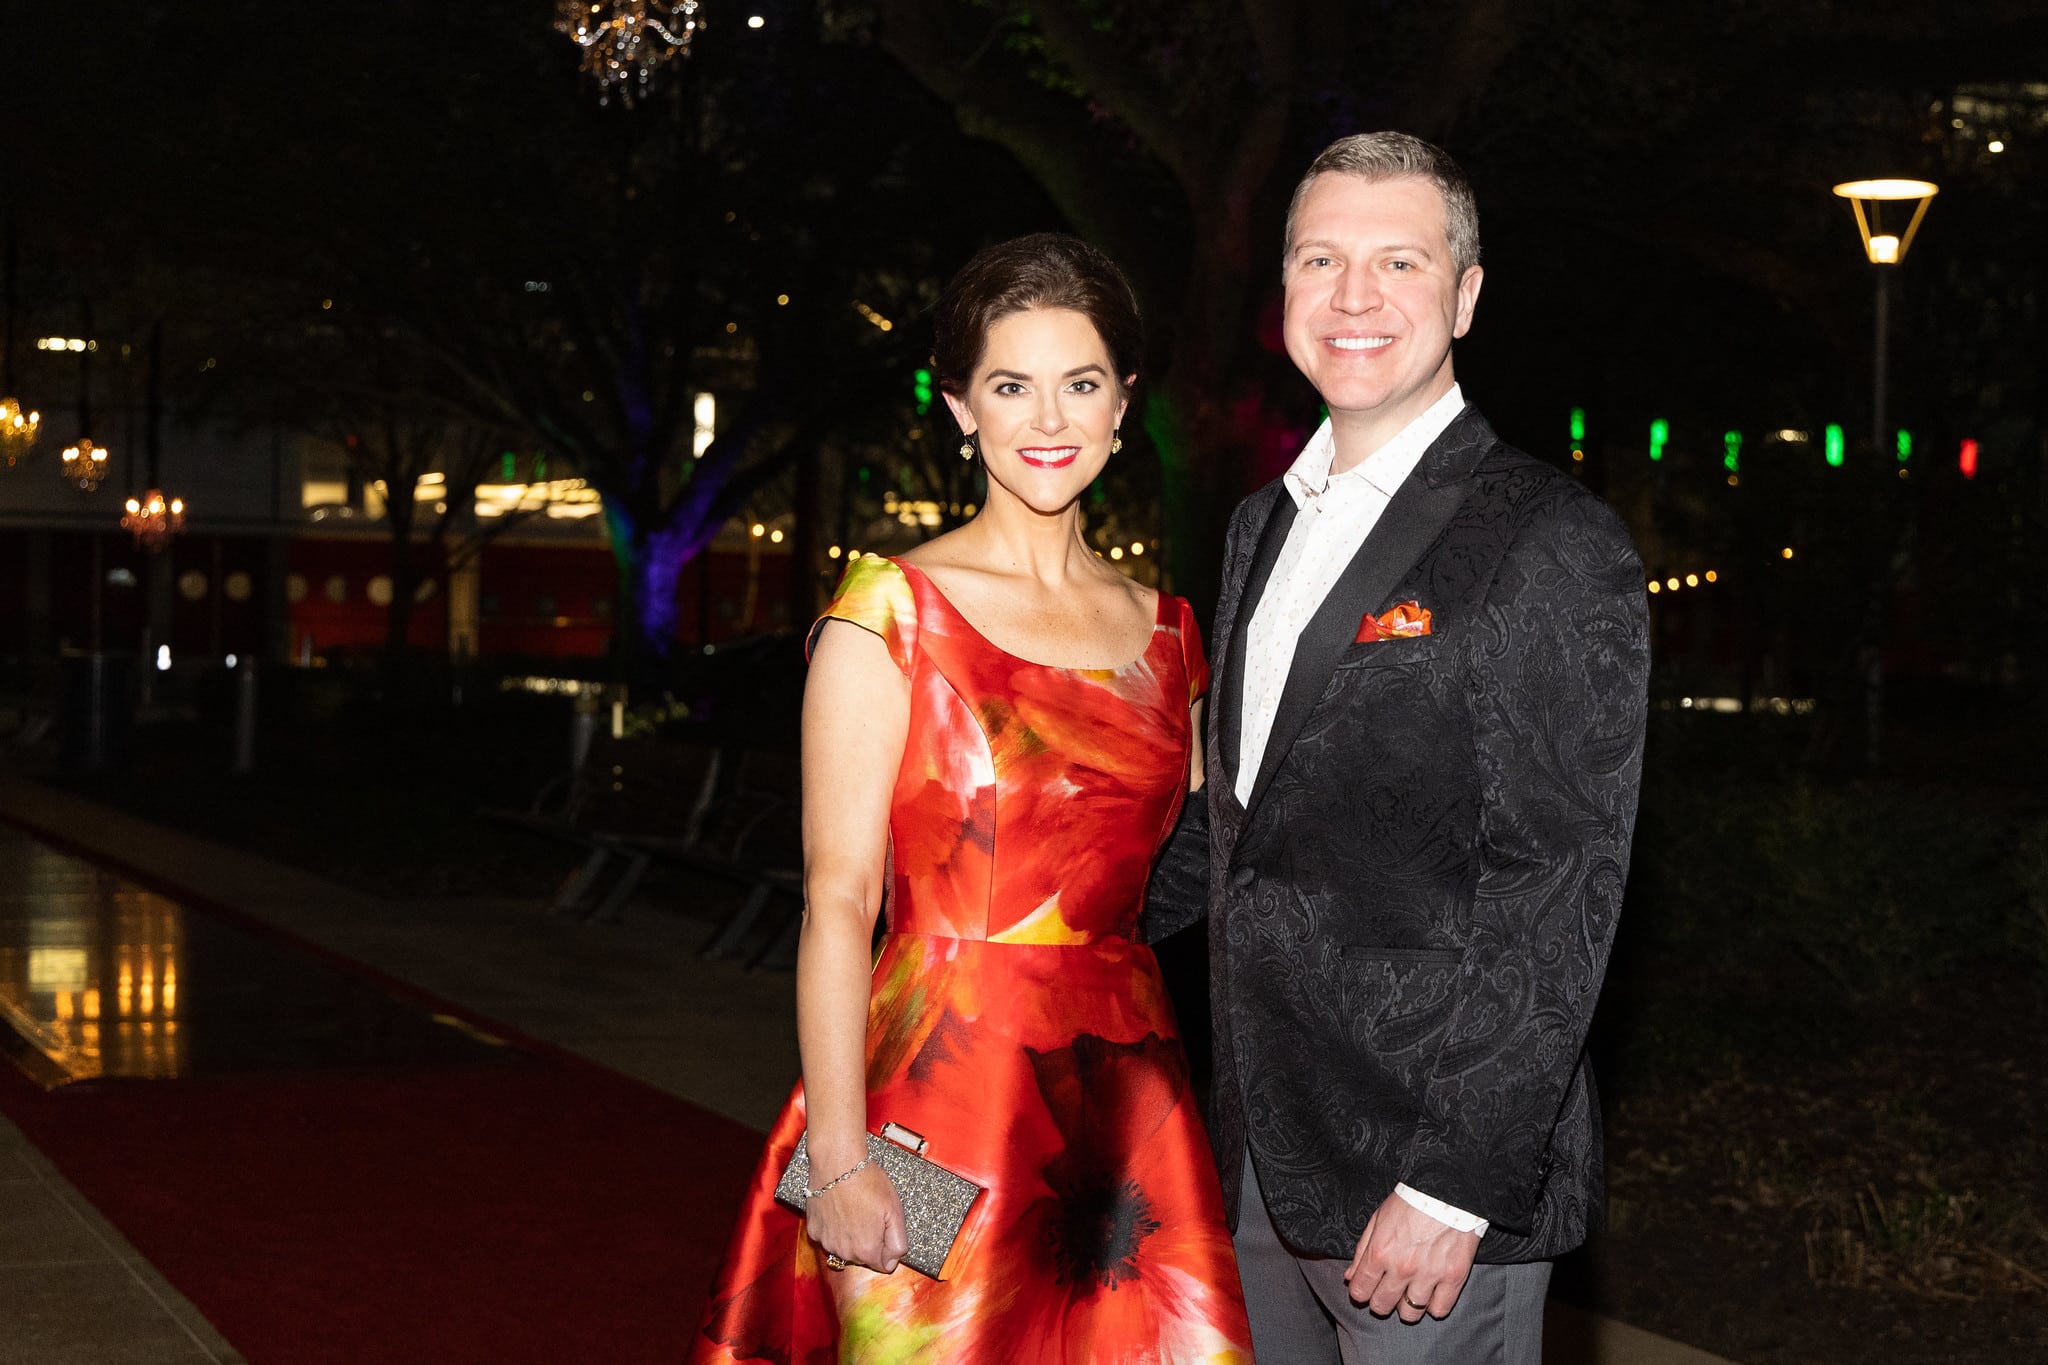 From L-R: Ann Ayre, Jonathan Ayre  Gala on the Green® at Discovery Green in downtown Houston. February 23, 2023. Photo: Lawrence Elizabeth Knox